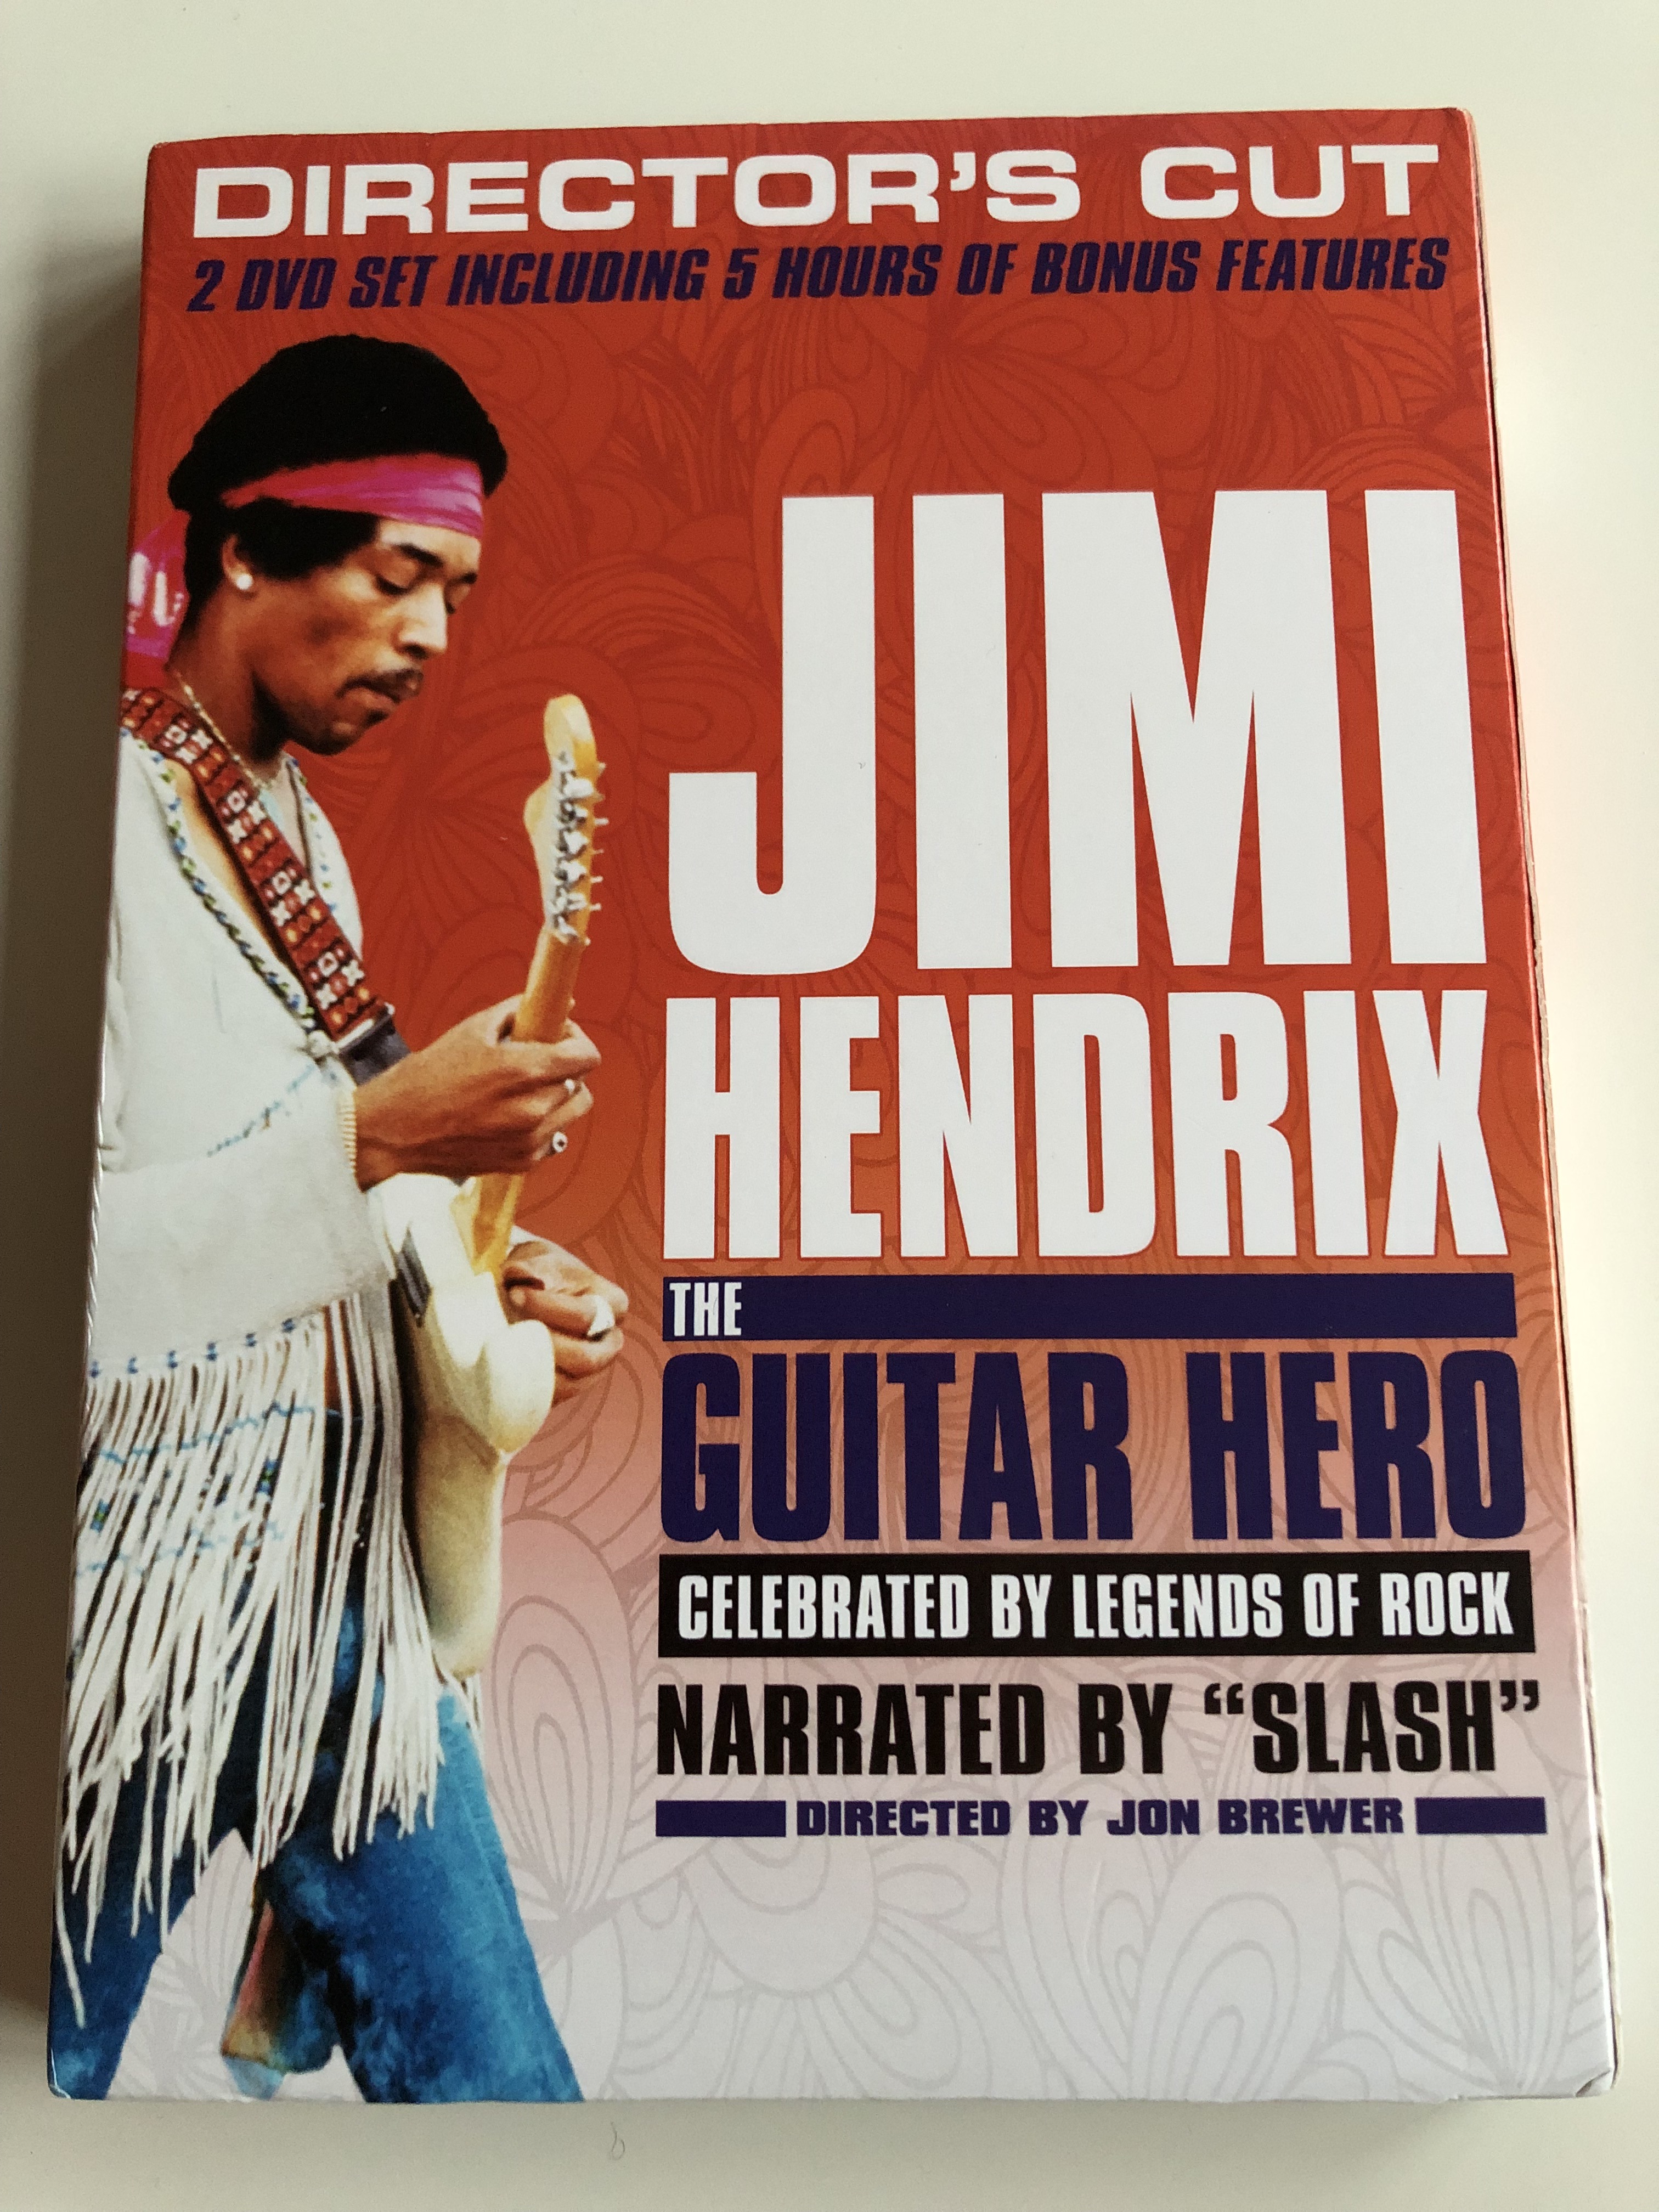 jimi-hendrix-the-guitar-hero-dvd-2013-celebrated-by-legends-of-rock-directed-by-jon-brewer-narrated-by-slash-director-s-cut-2-dvd-set-including-5-hrs-of-bonus-features-1-.jpg